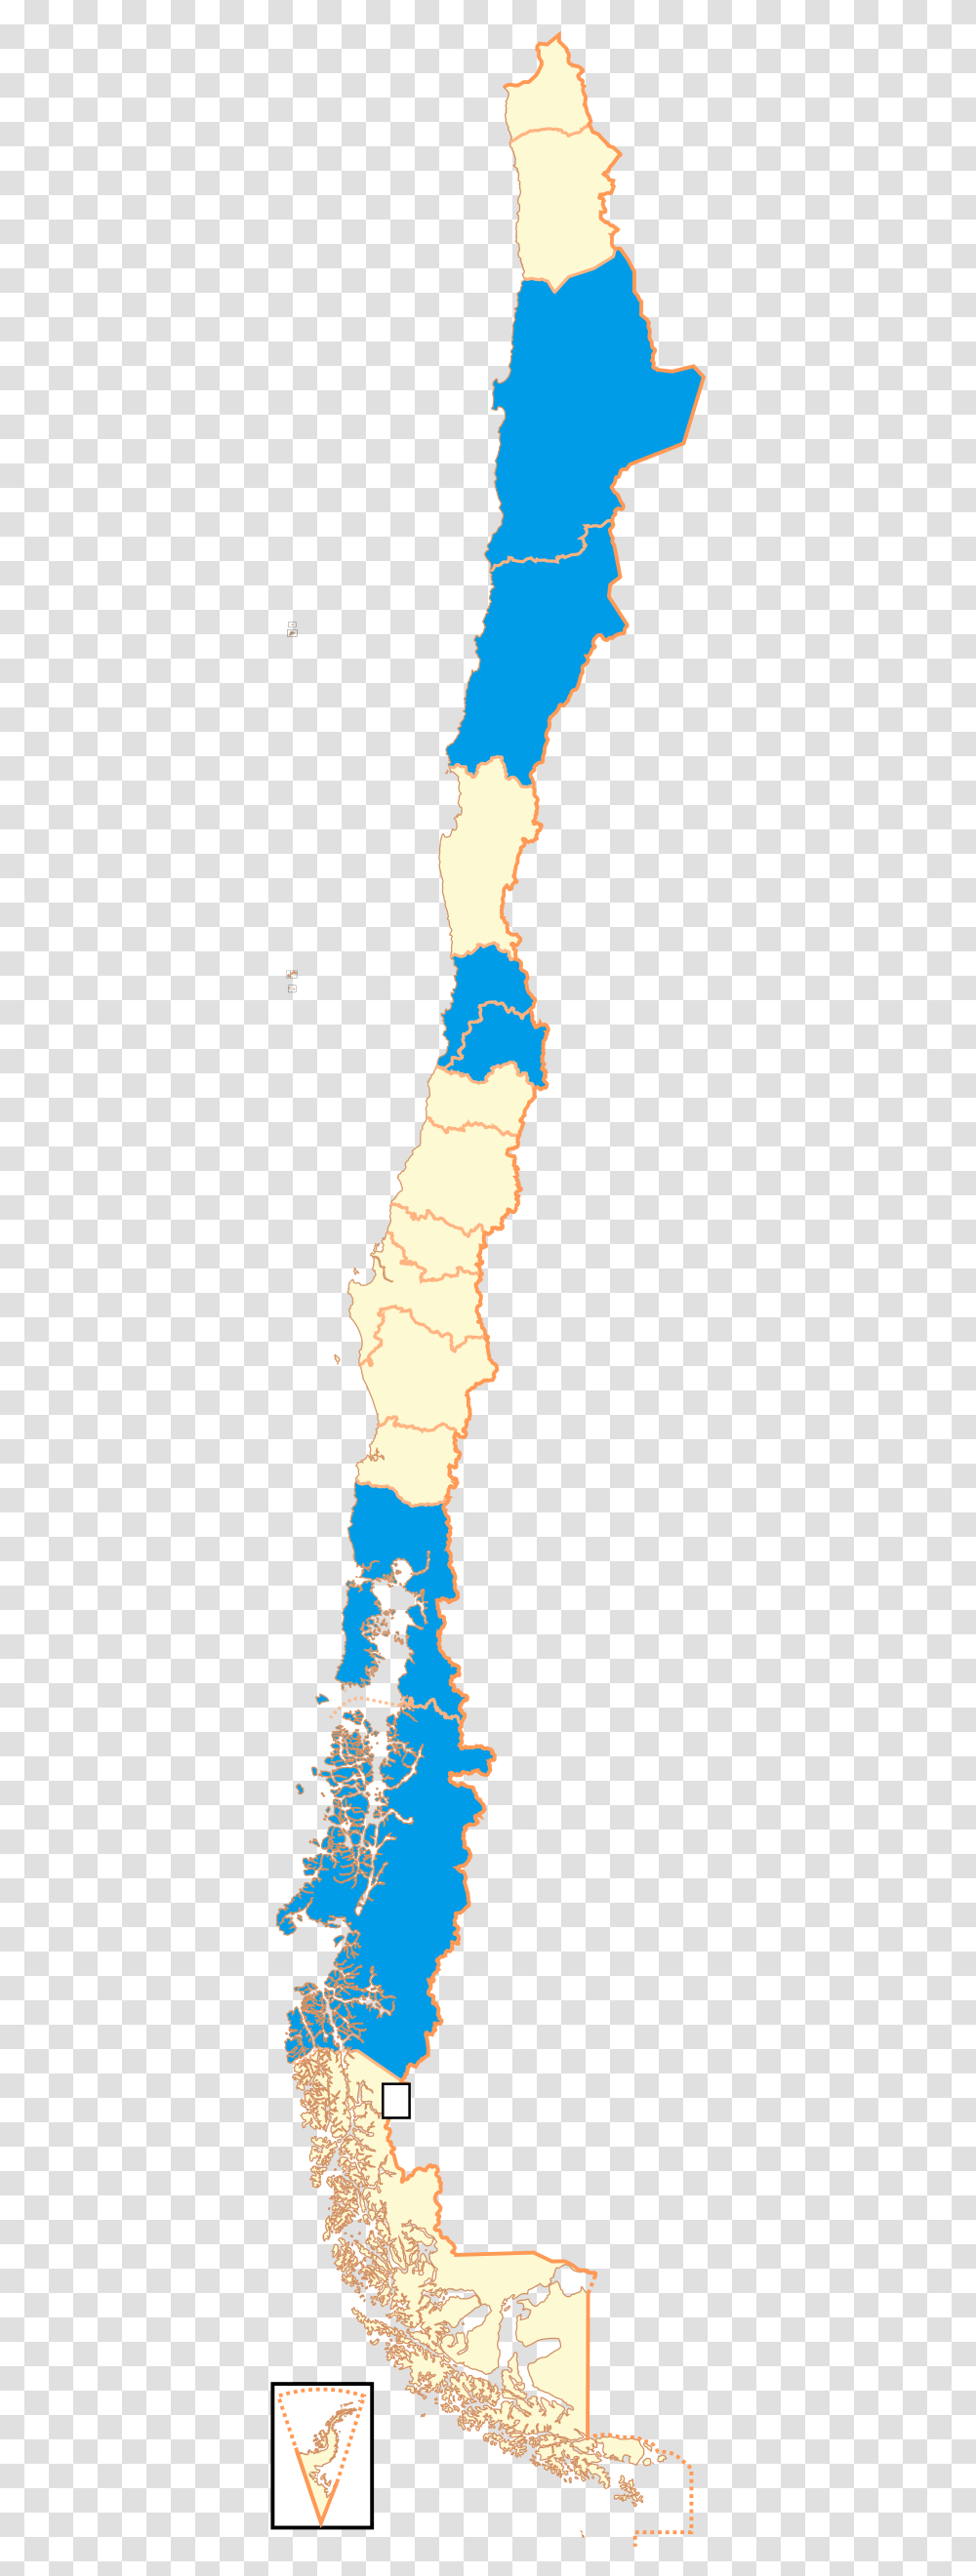 Chile Time Zones Transparent Png